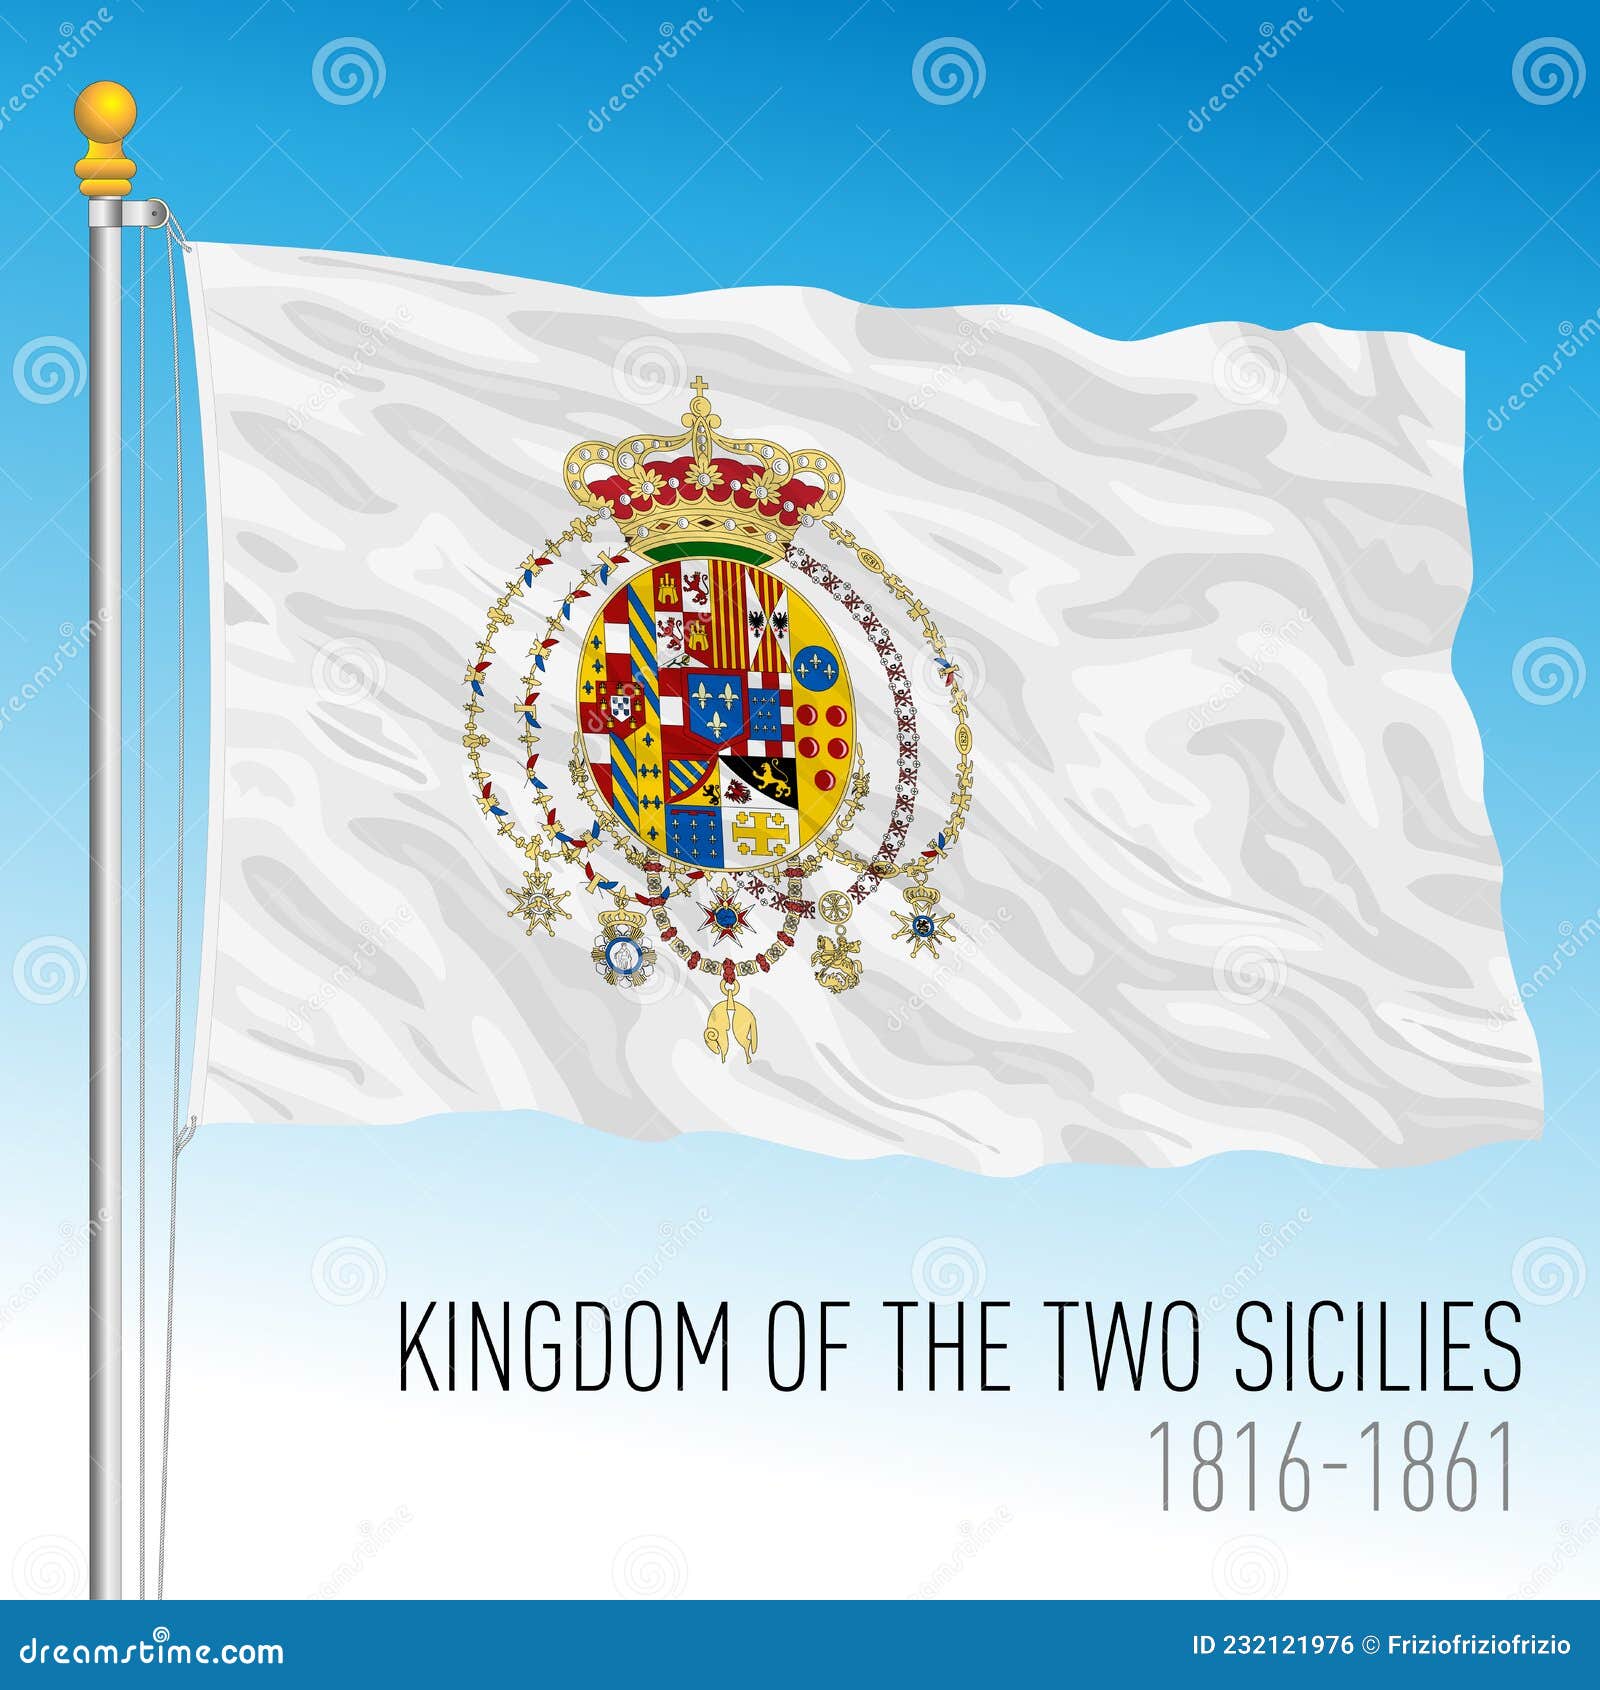 The Kingdom of the Two Sicilies